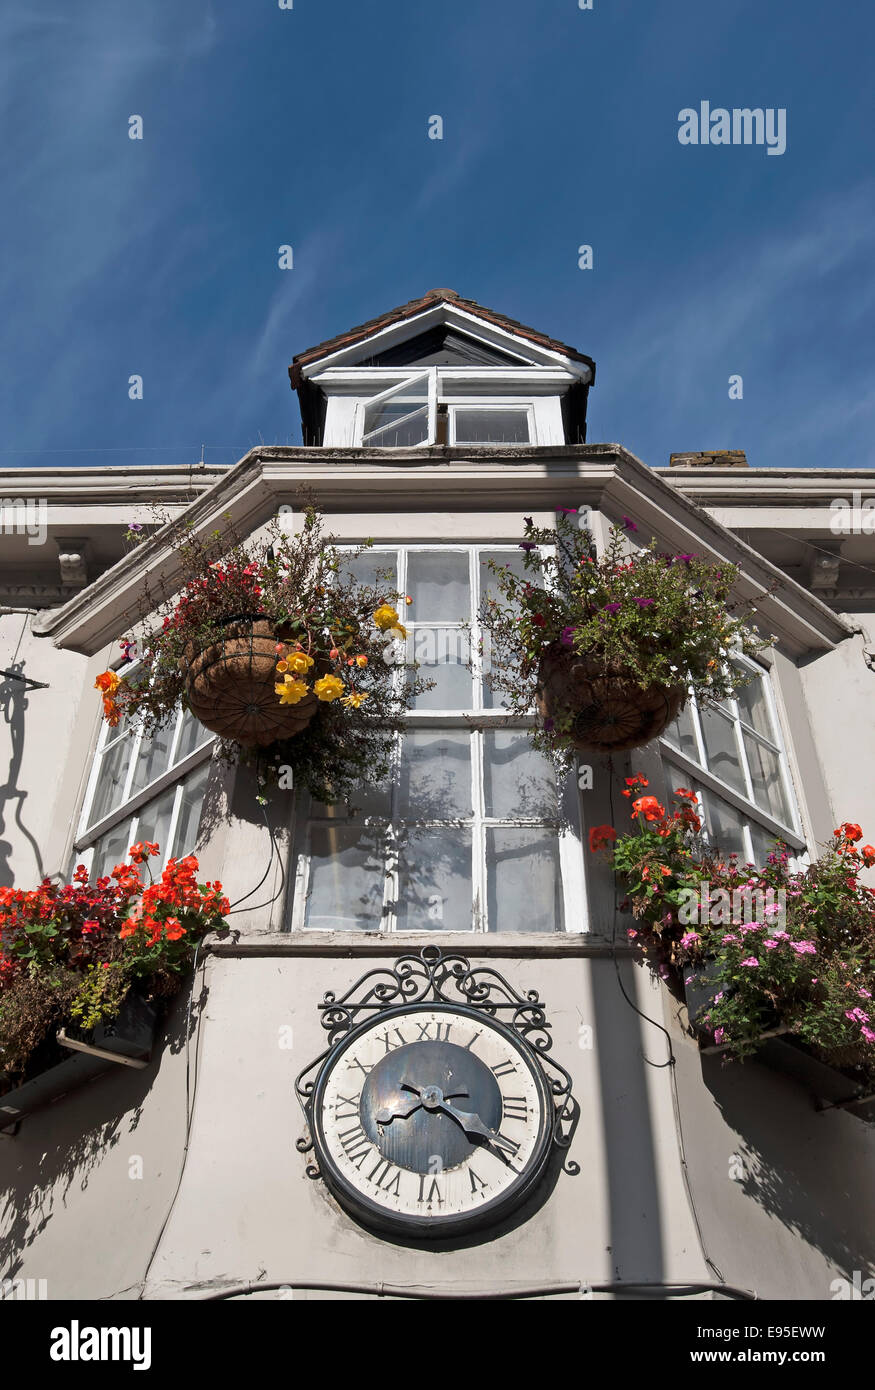 exterior, with hanging baskets and roman numeral clockface, of the george public house, twickenham, middlesex, england Stock Photo